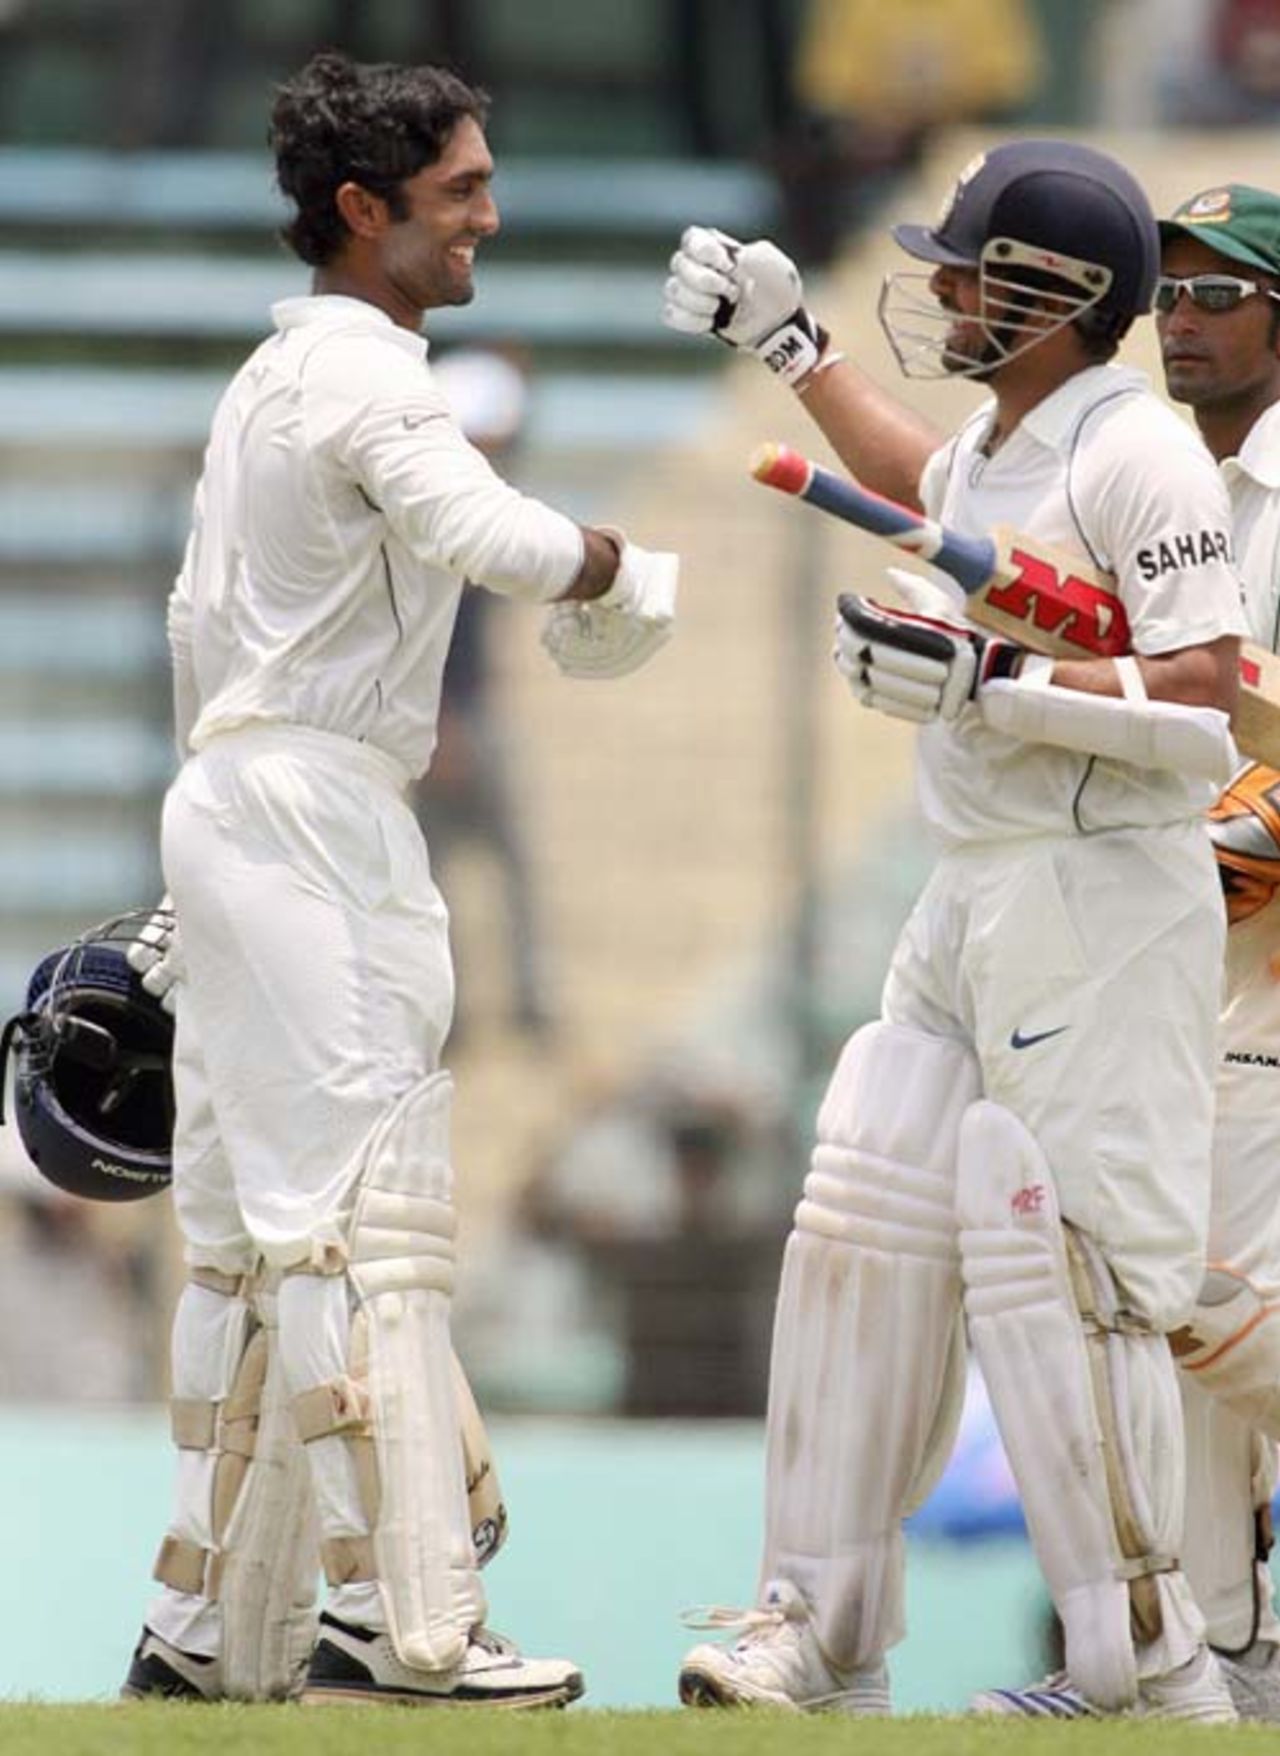 Dinesh Karthik is congratulated by Sachin Tendulkar on his maiden Test century,Bangladesh v India, 2nd Test, Mirpur, 2nd day, May 26, 2007